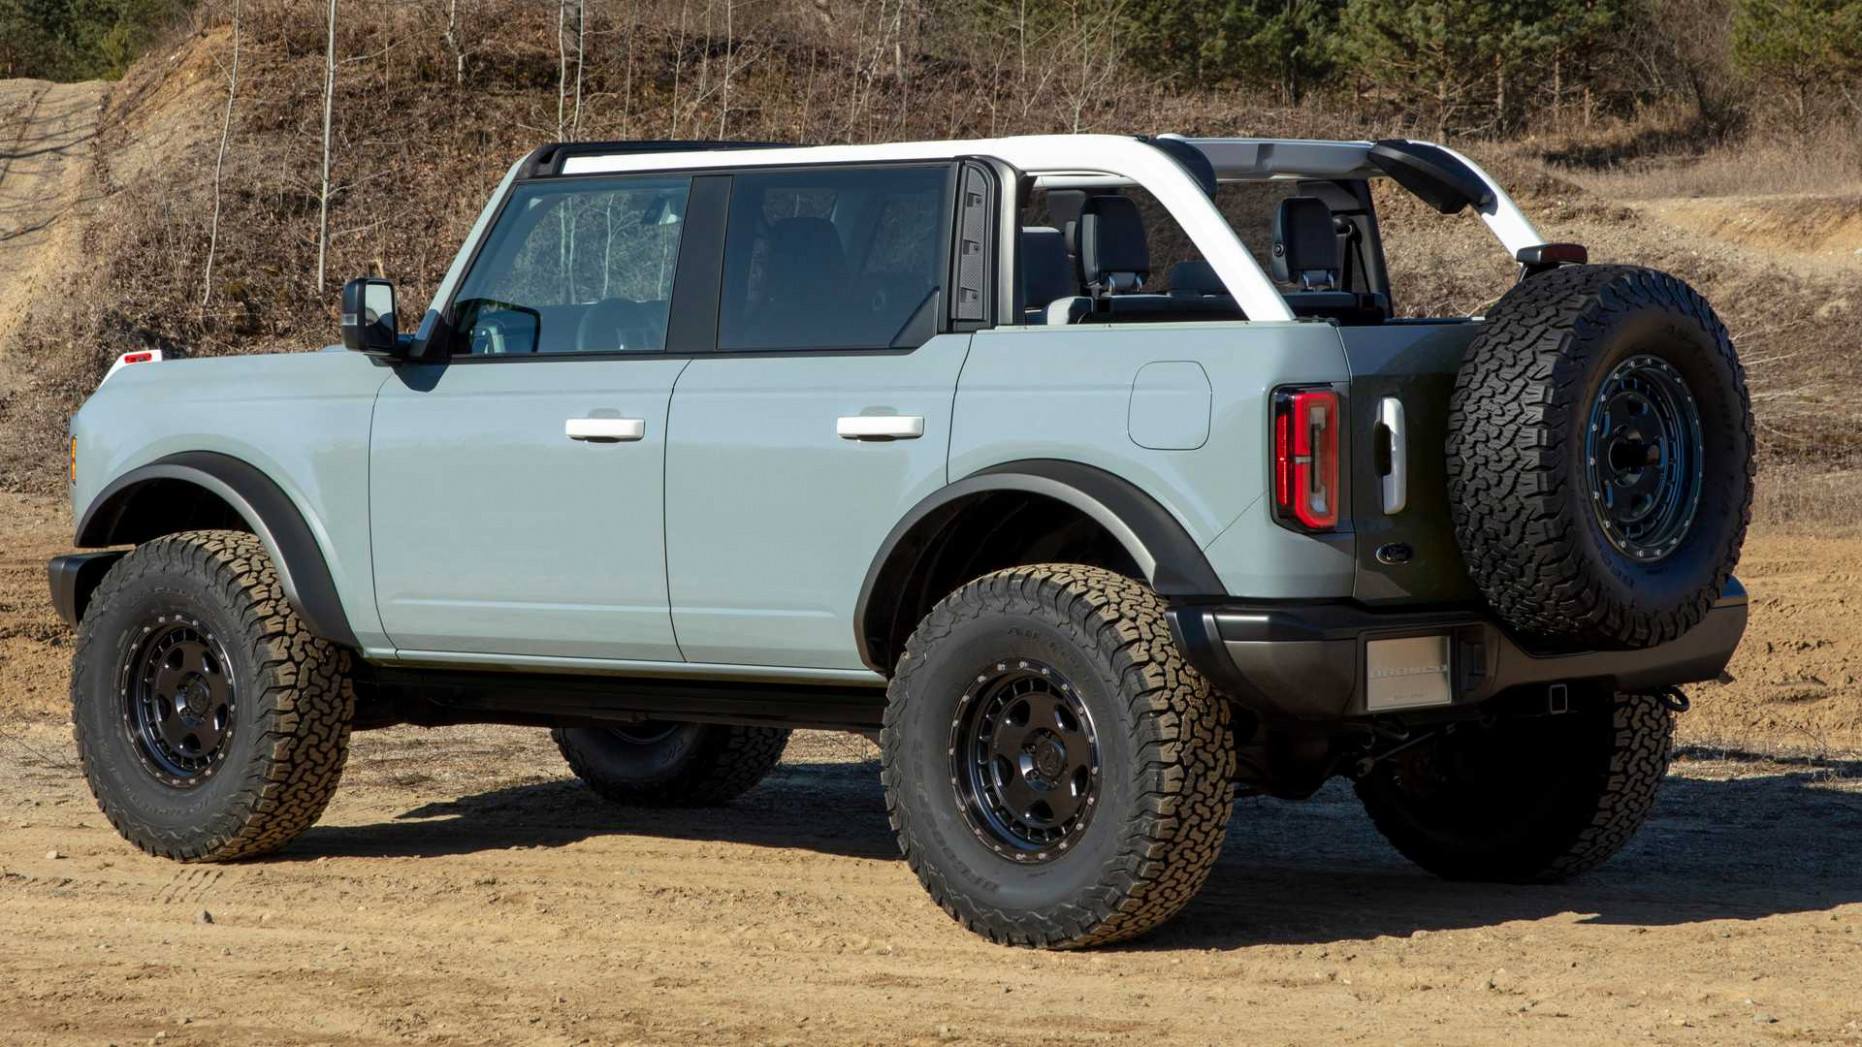 Ford Bronco Sasquatch Package Price Possibly Revealed In Survey - ford bronco sasquatch price